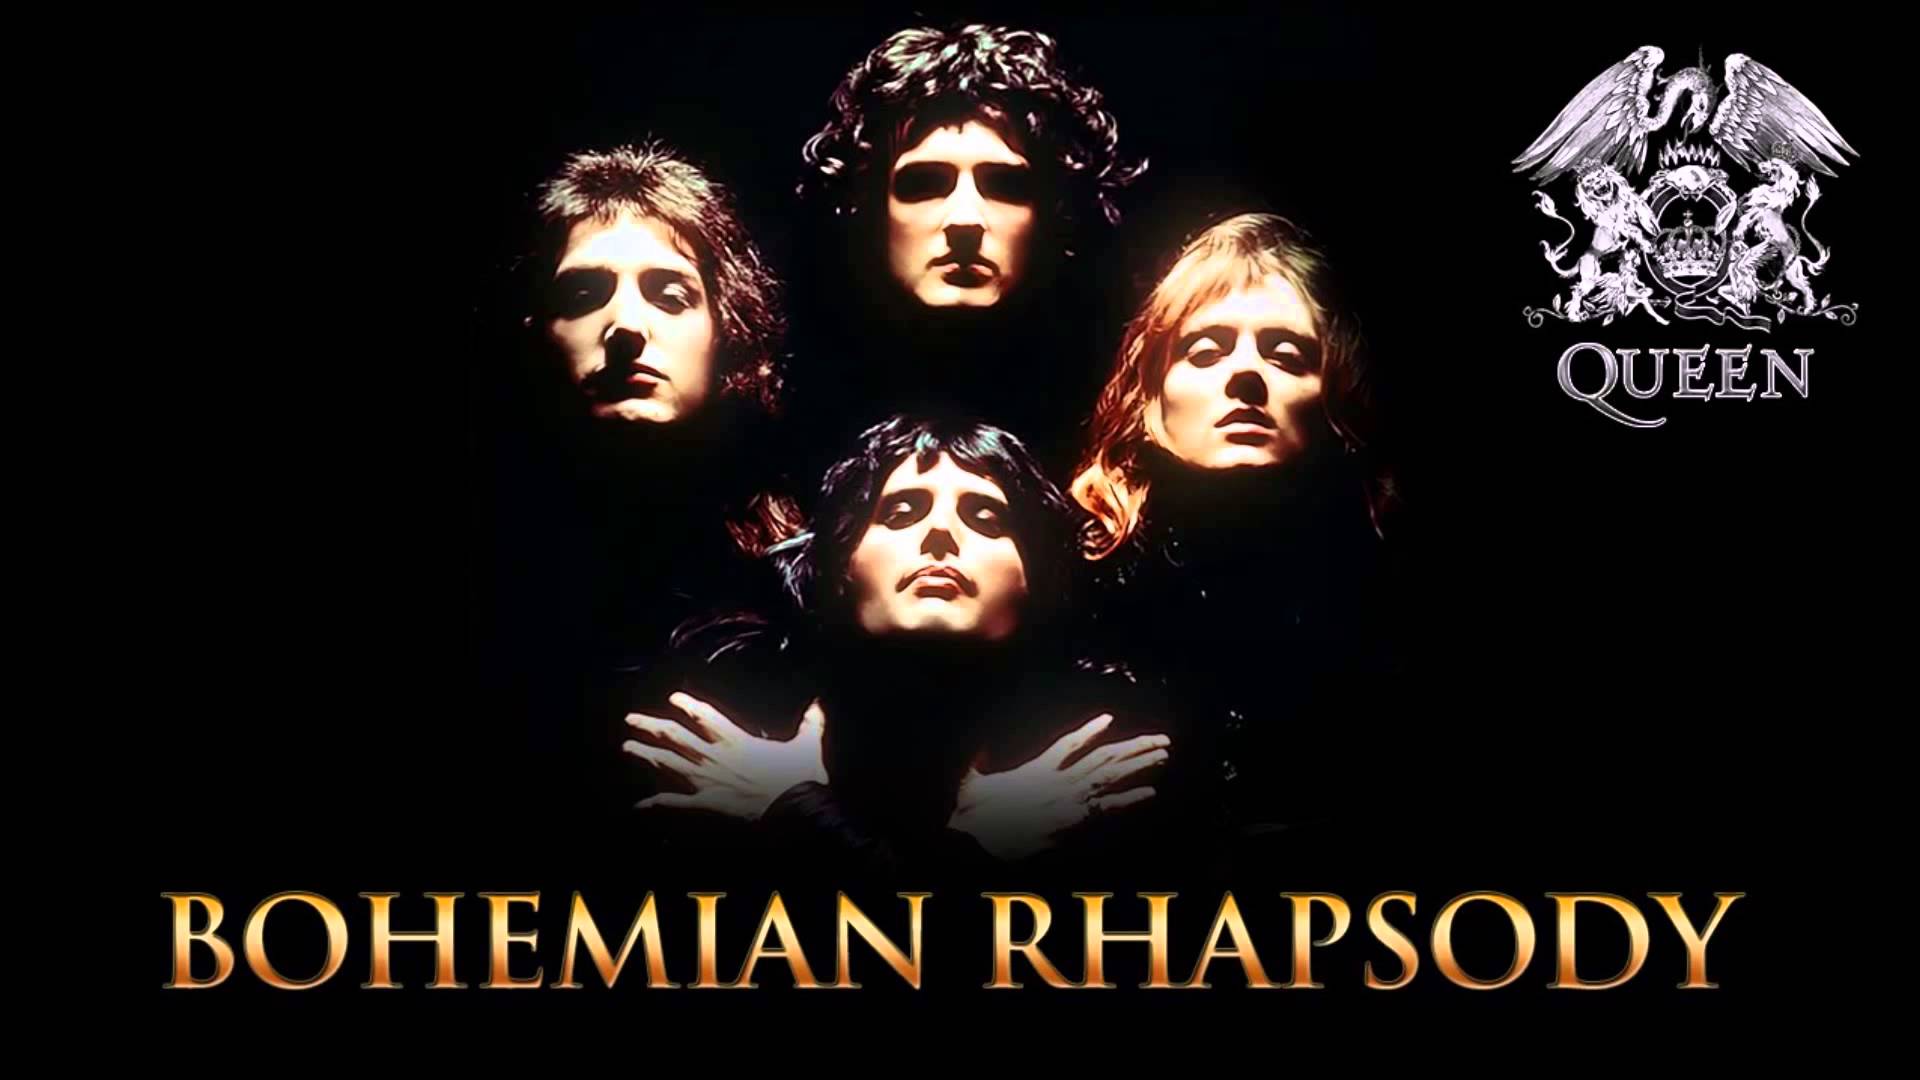 download the new for android Bohemian Rhapsody